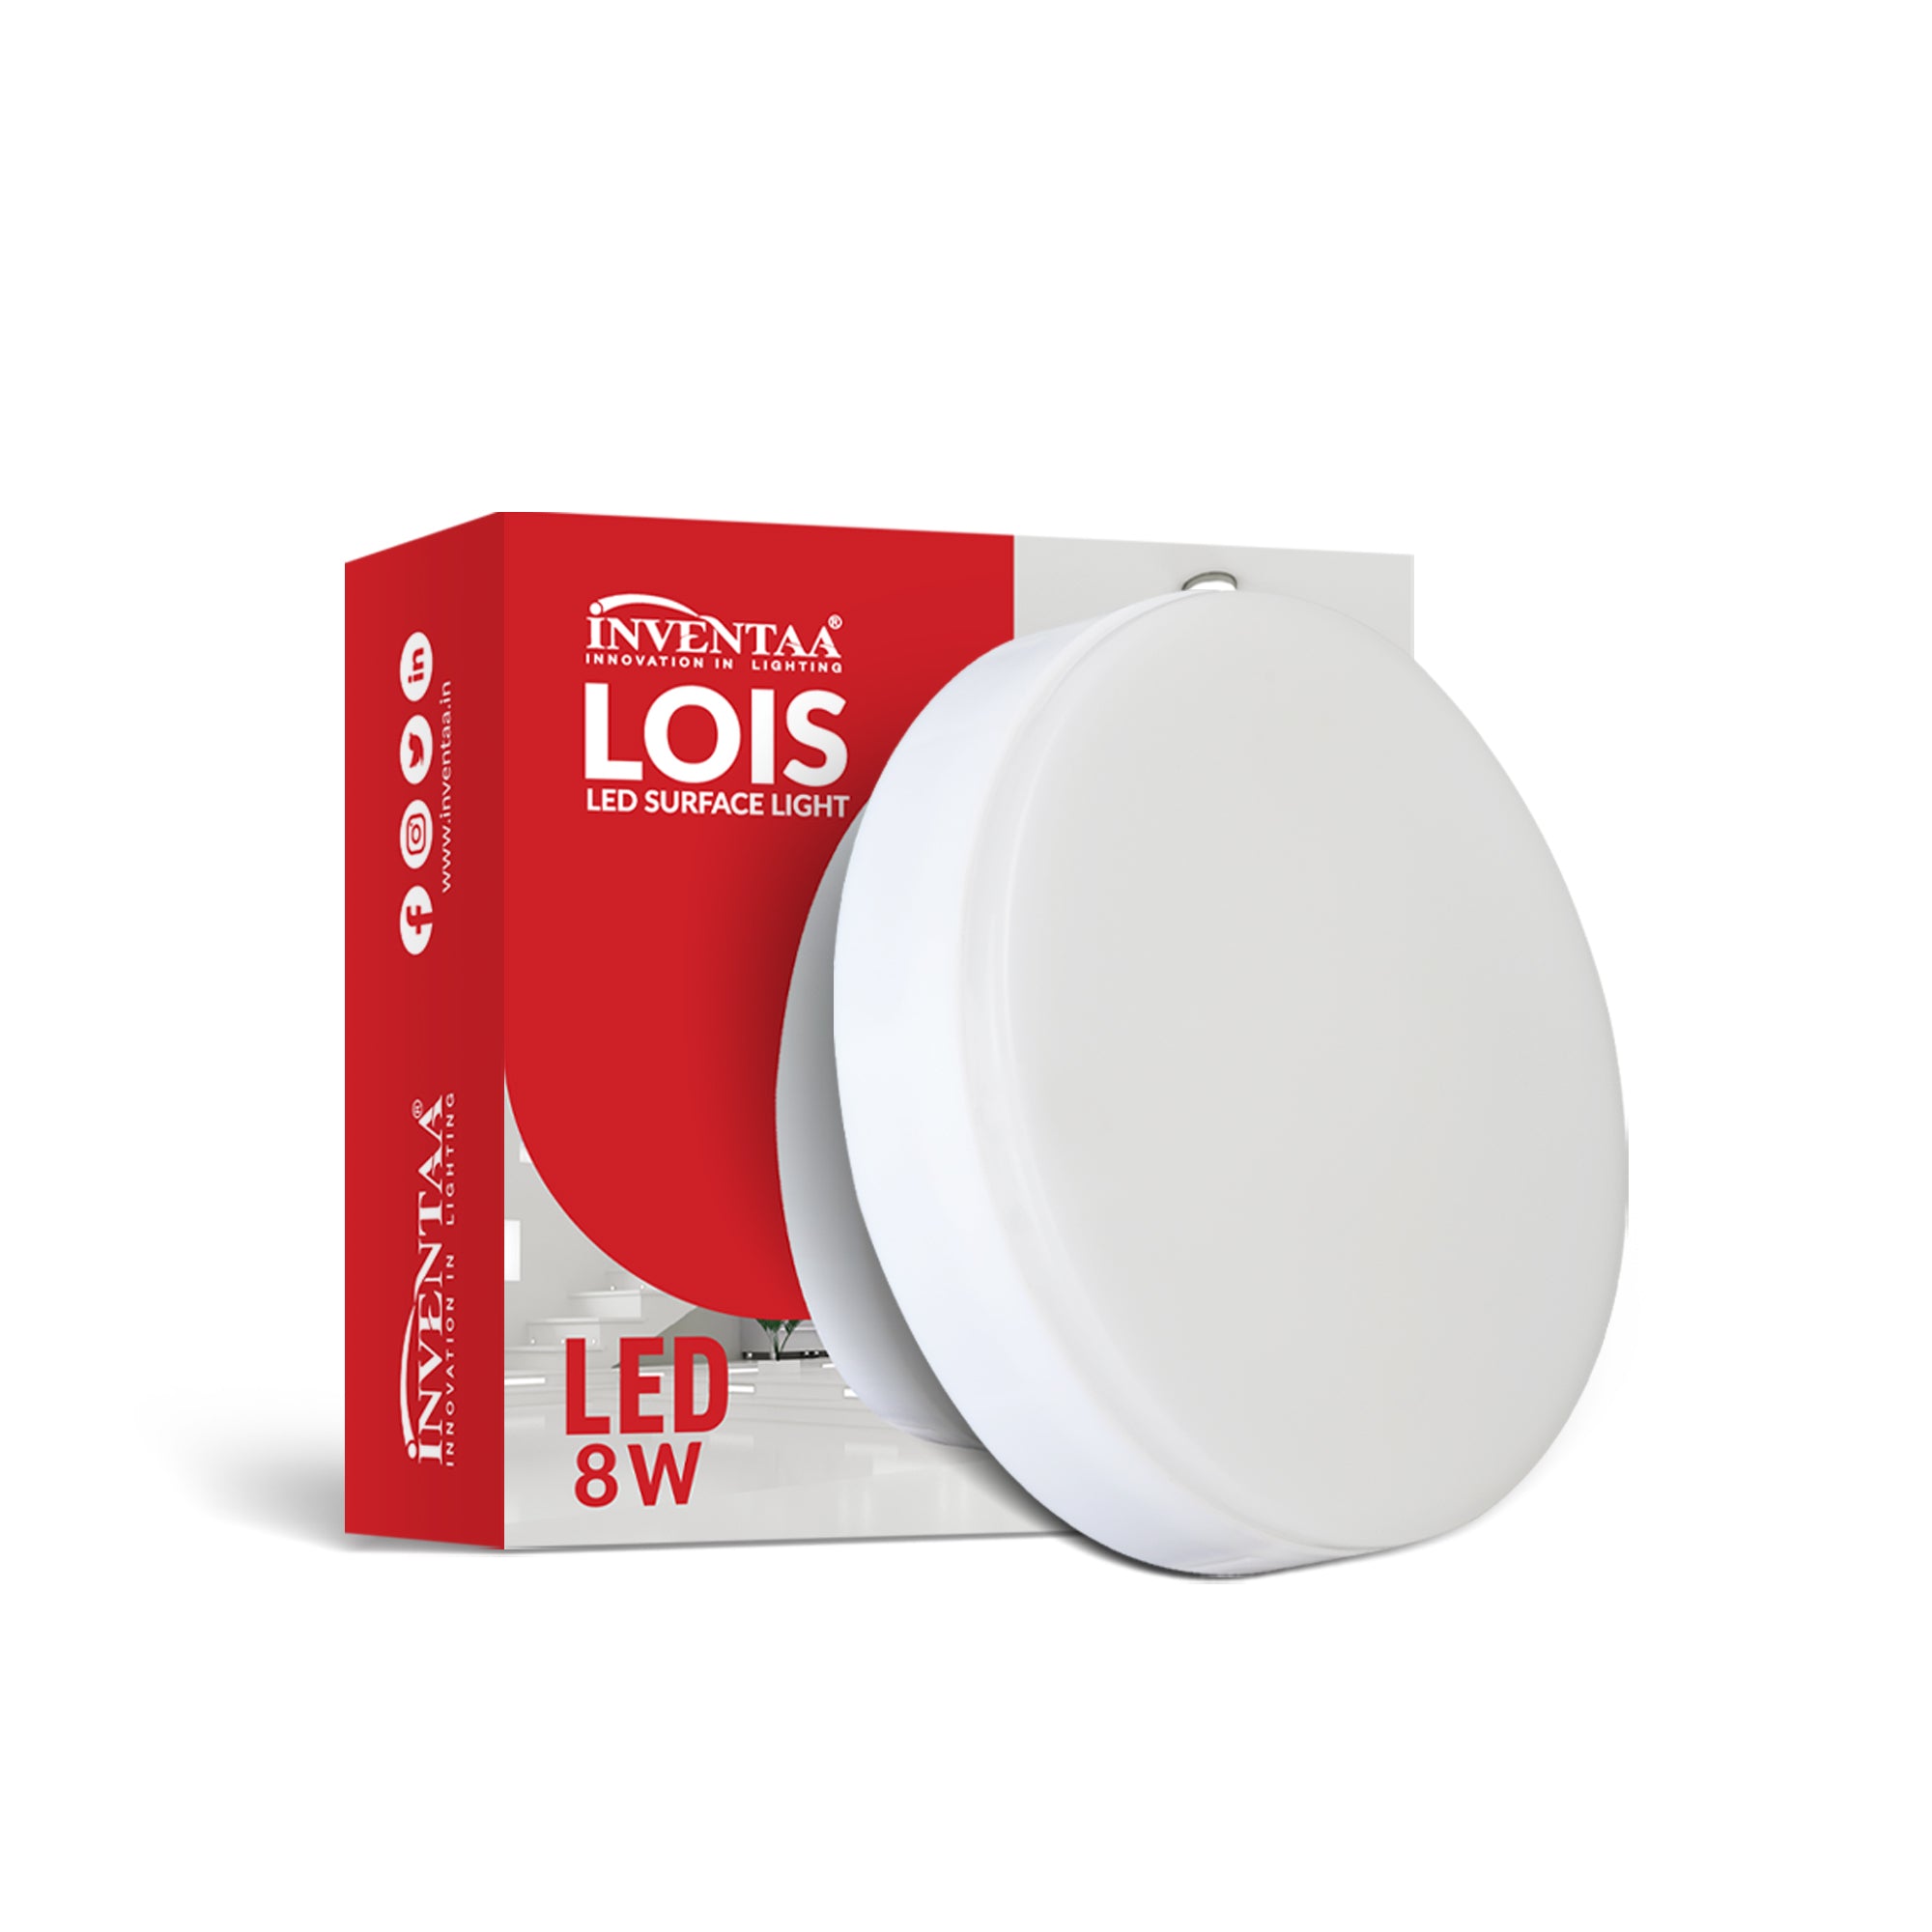 Lois Round 8W LED Surface Light With Its Box Enclosure  #watts_8w